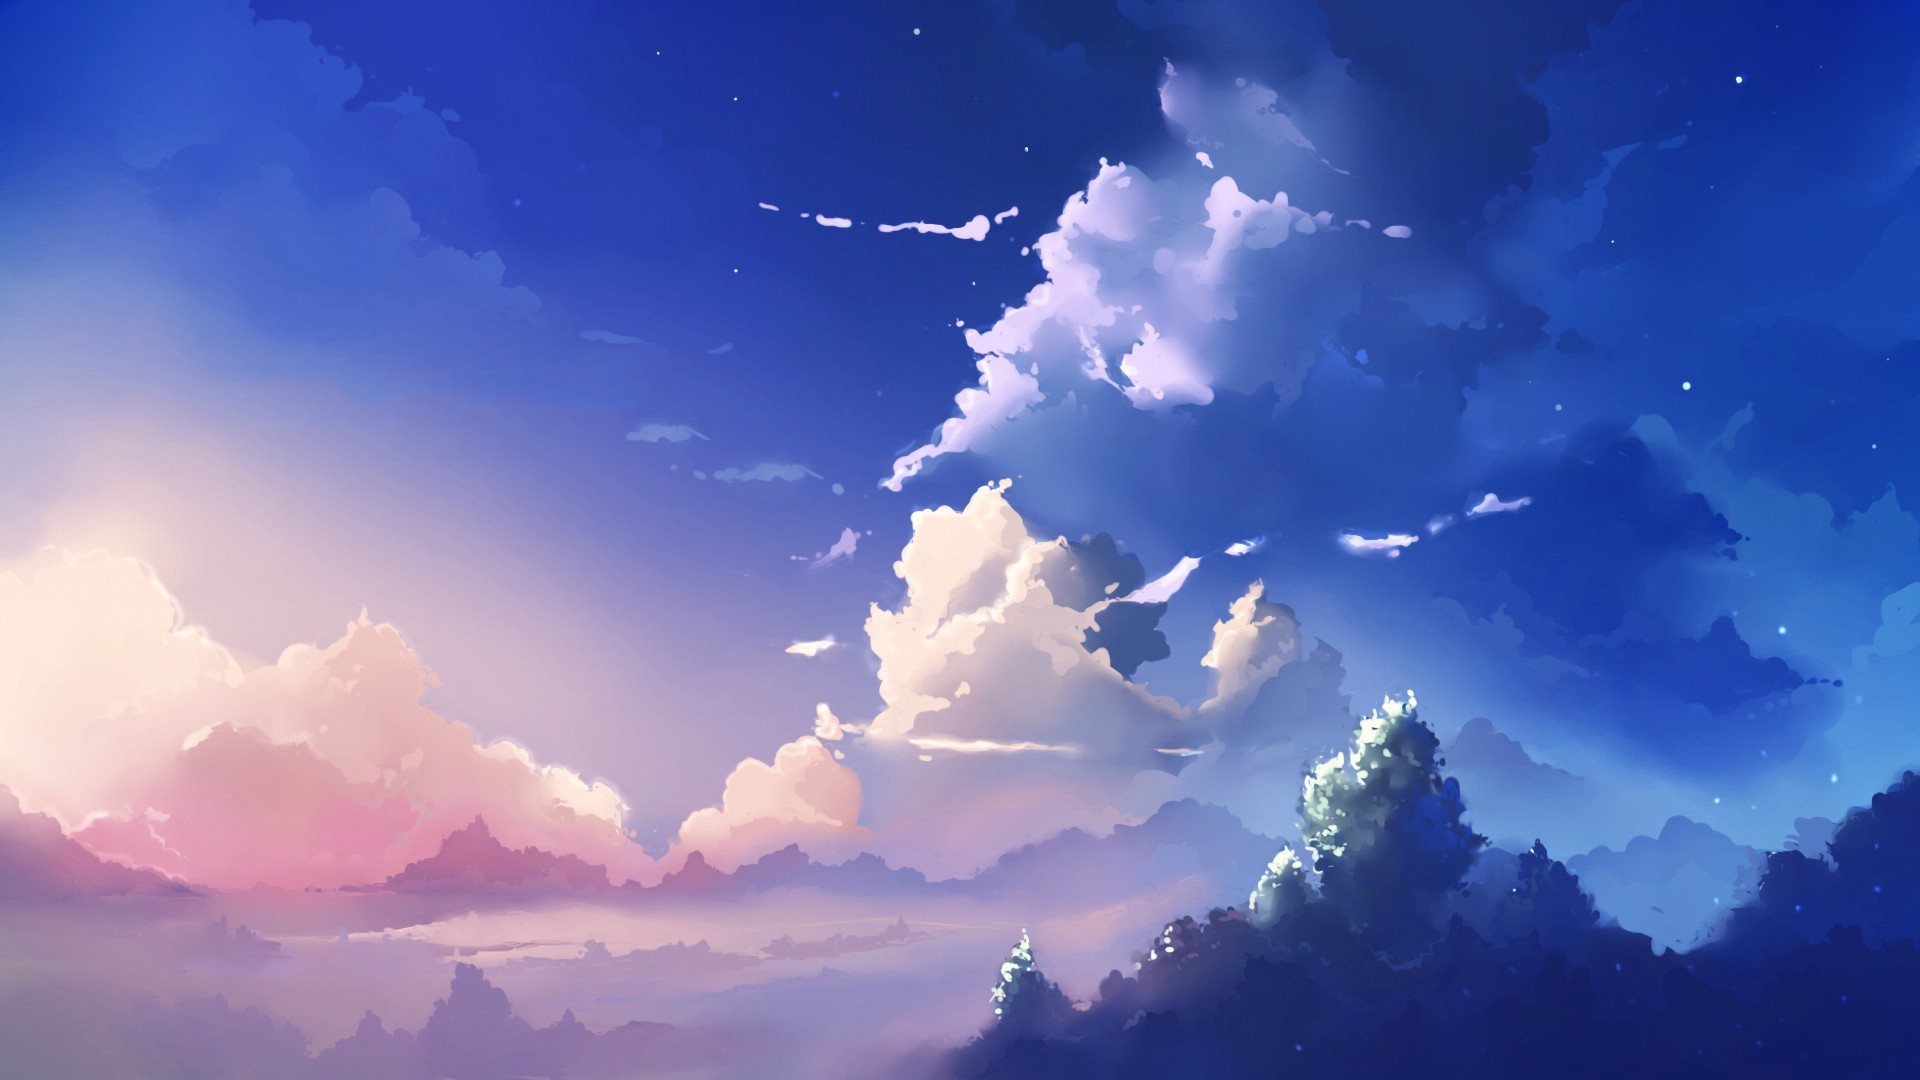 Anime Scenery wallpaper ·① Download free awesome wallpapers for desktop